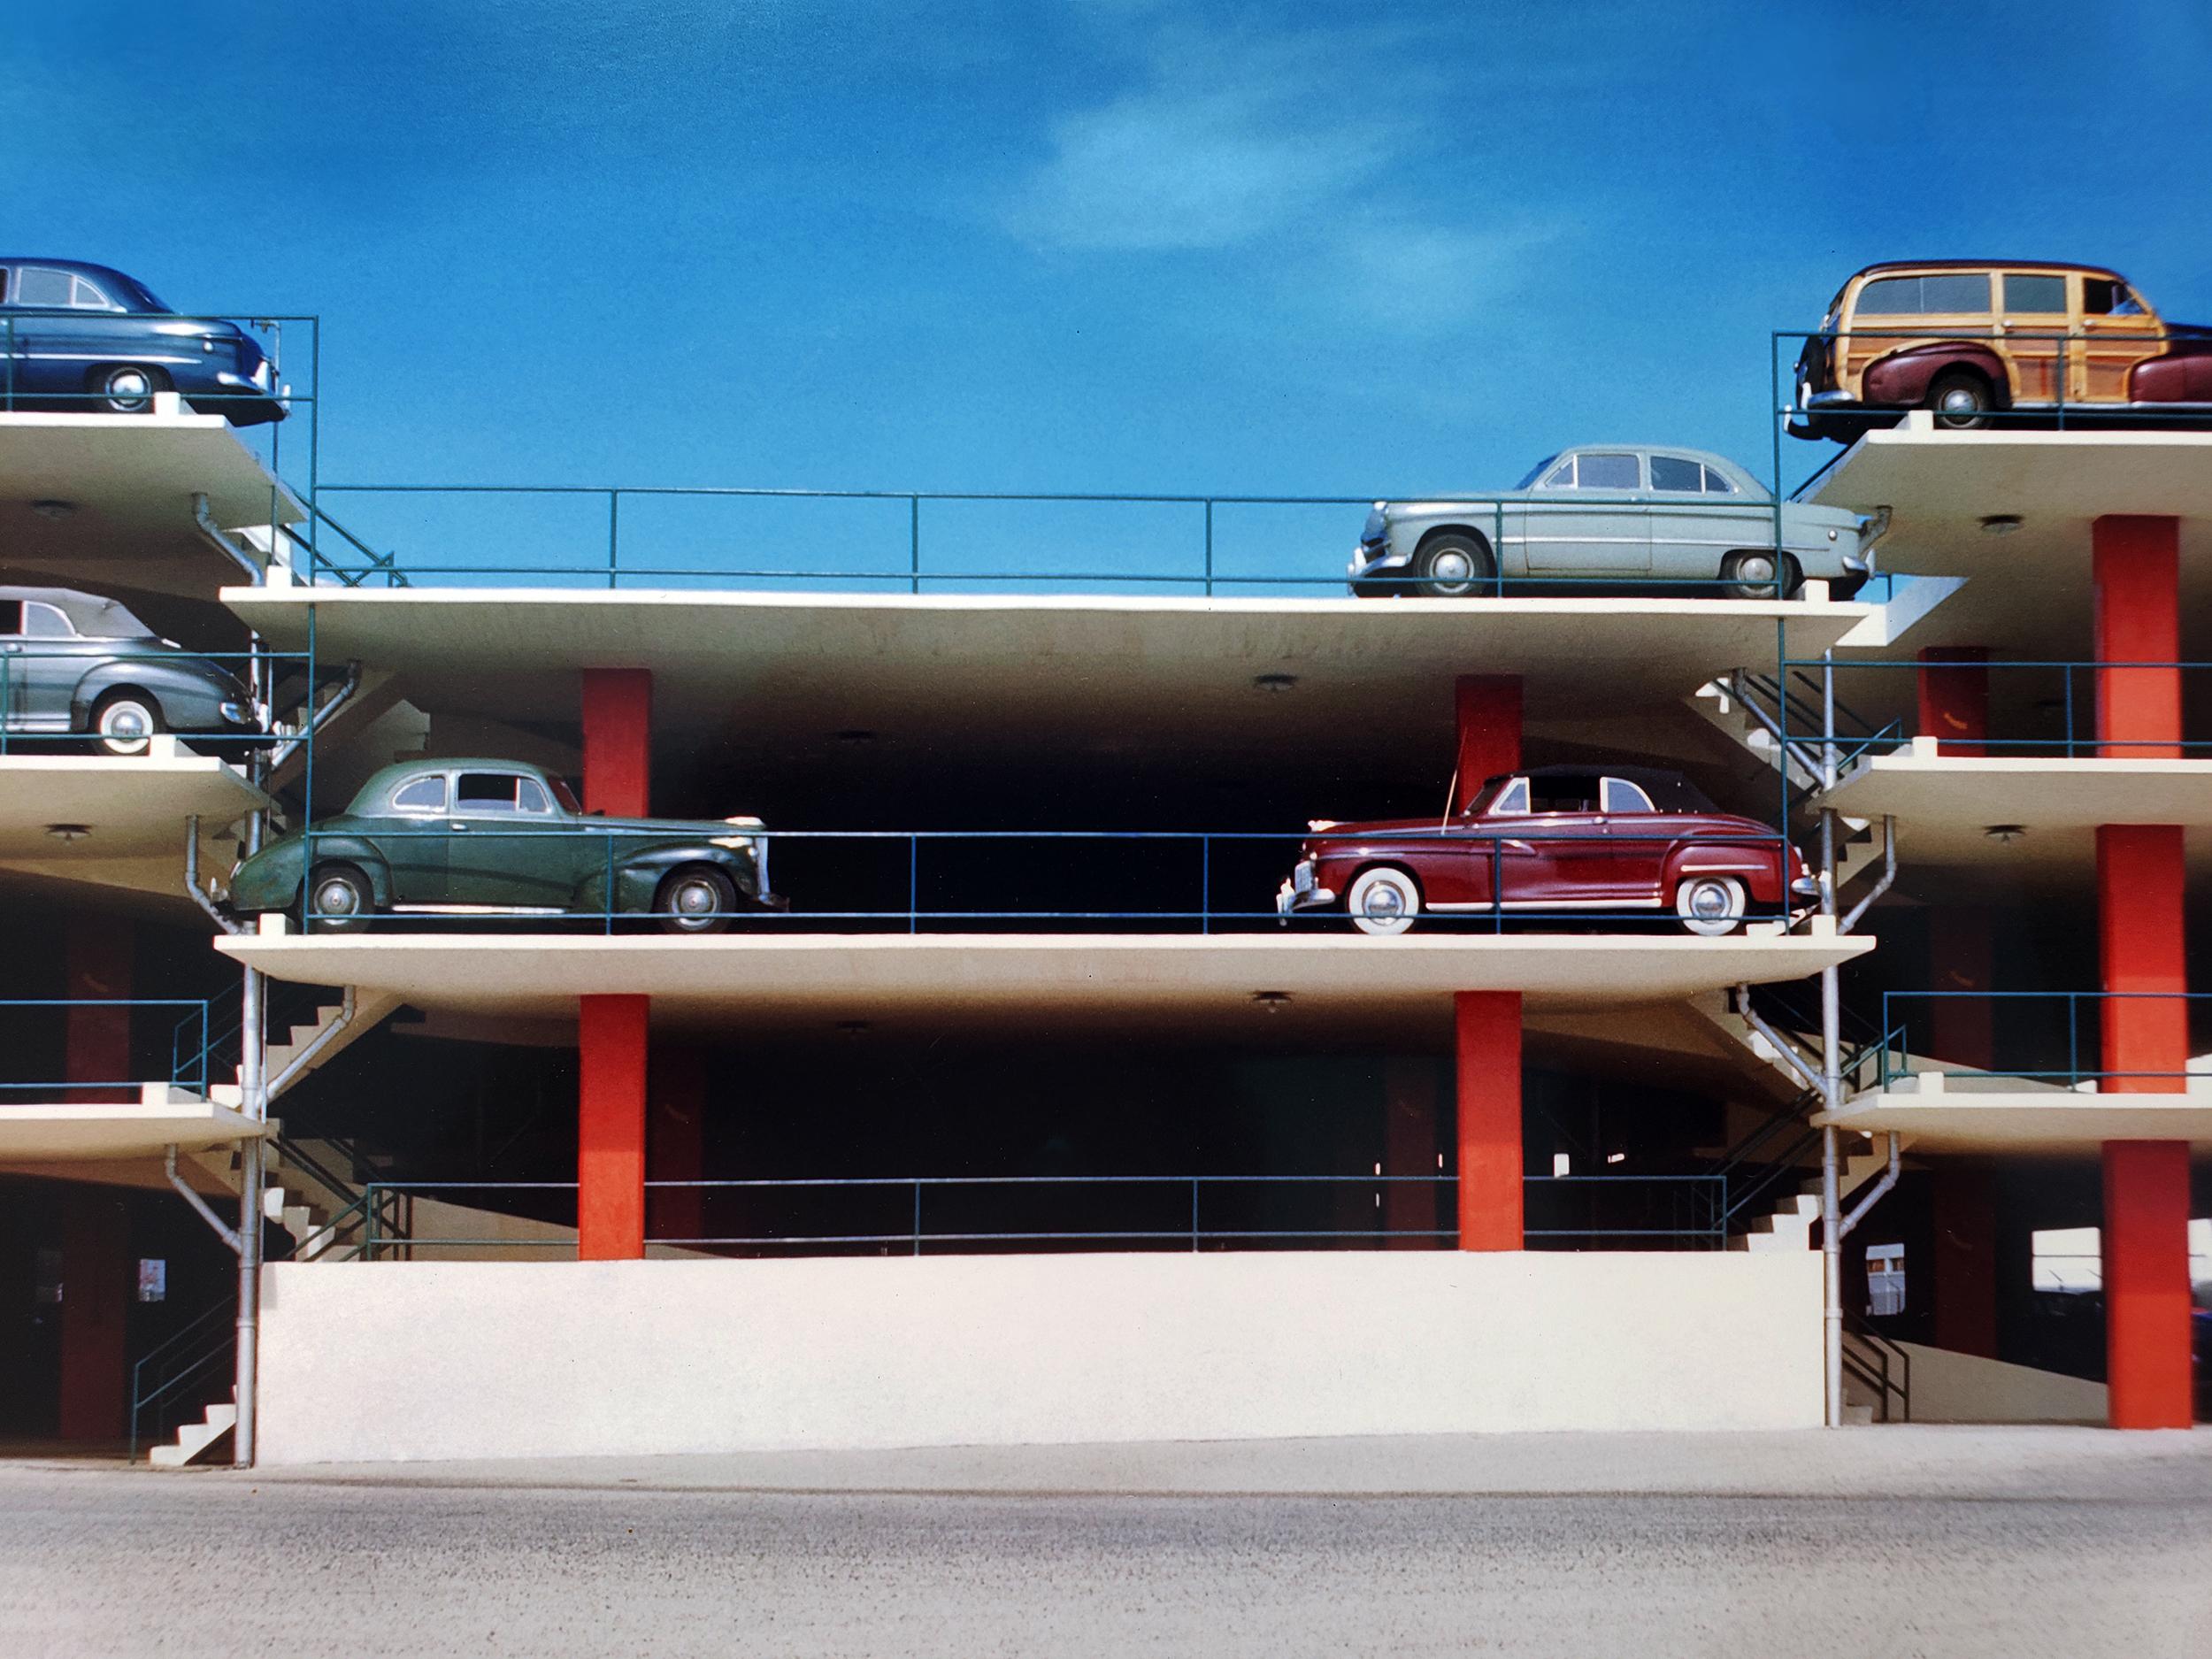 Miami Parking Garage, Robert Law Weed and Associates, Miami Fl.  - Modern Photograph by Ezra Stoller